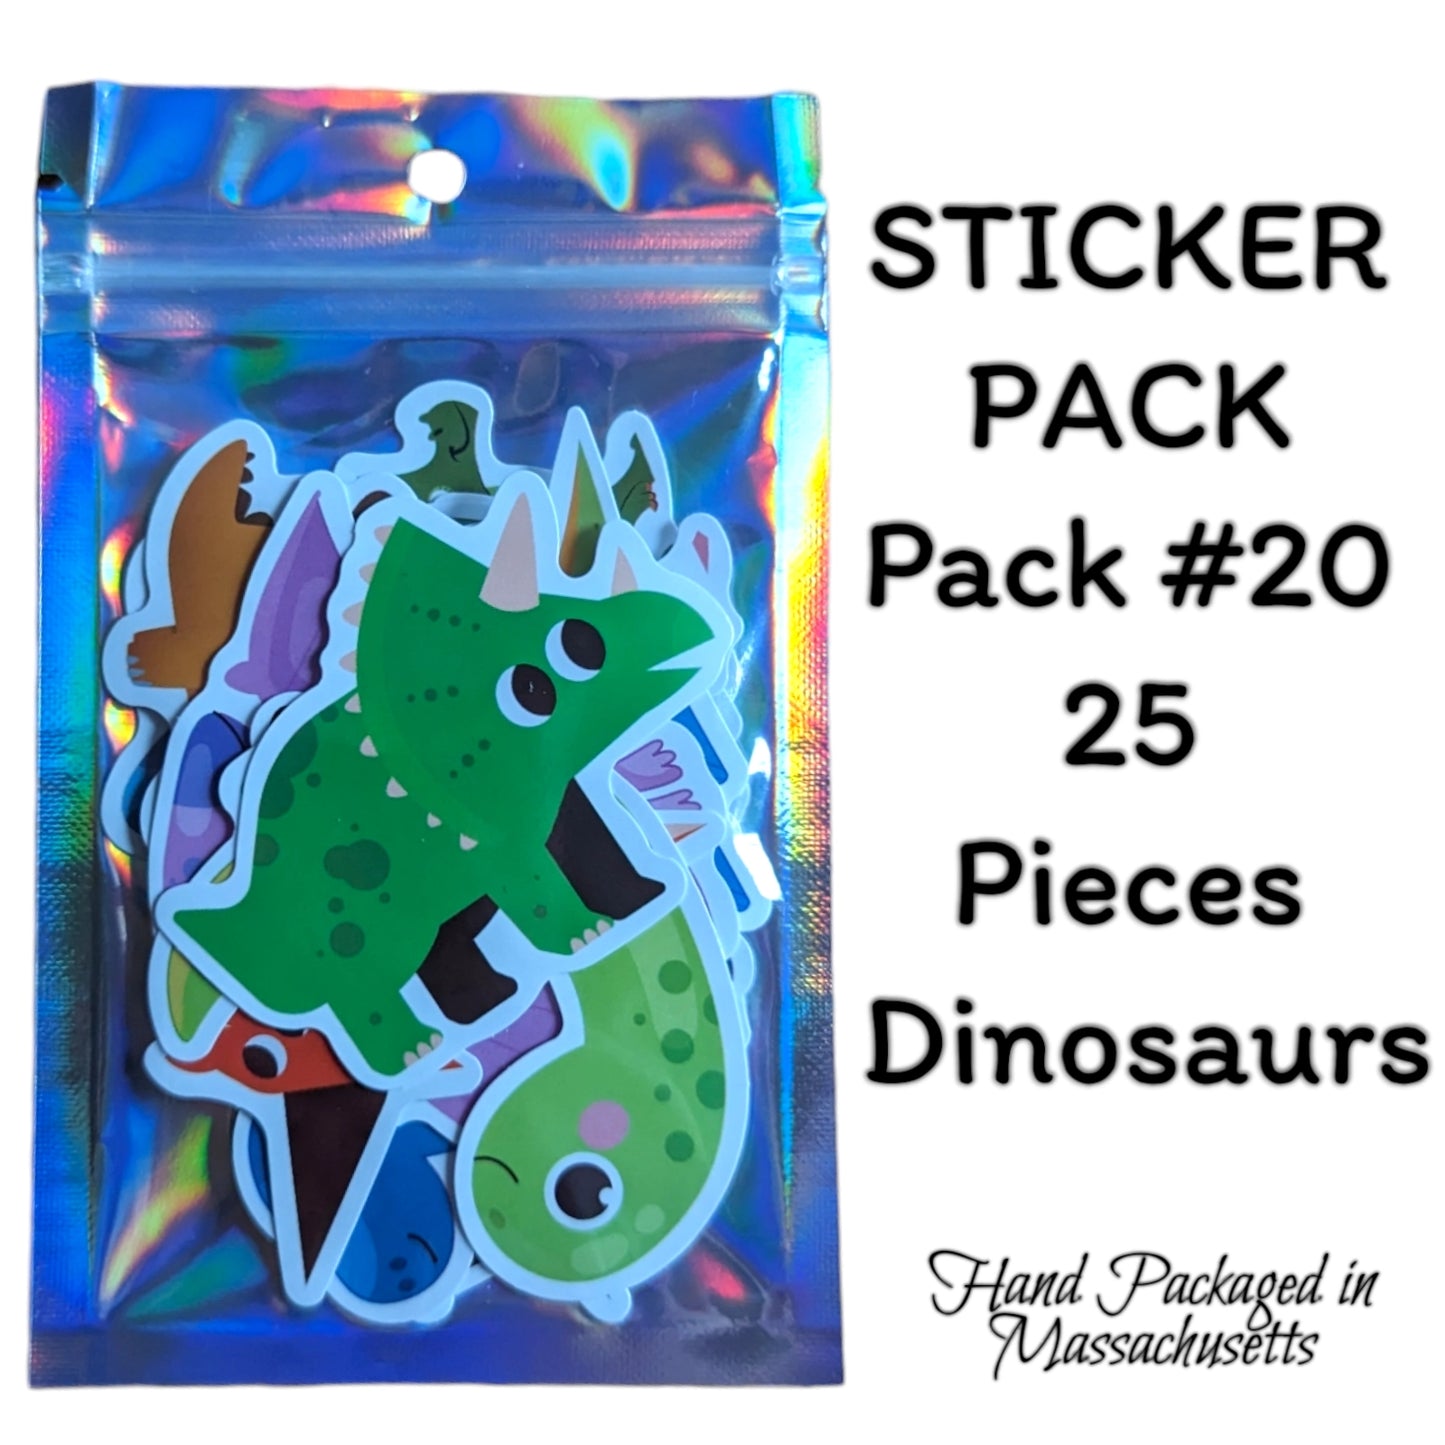 STICKER PACK - Pack #20 - 25 Pieces - Dinosaurs